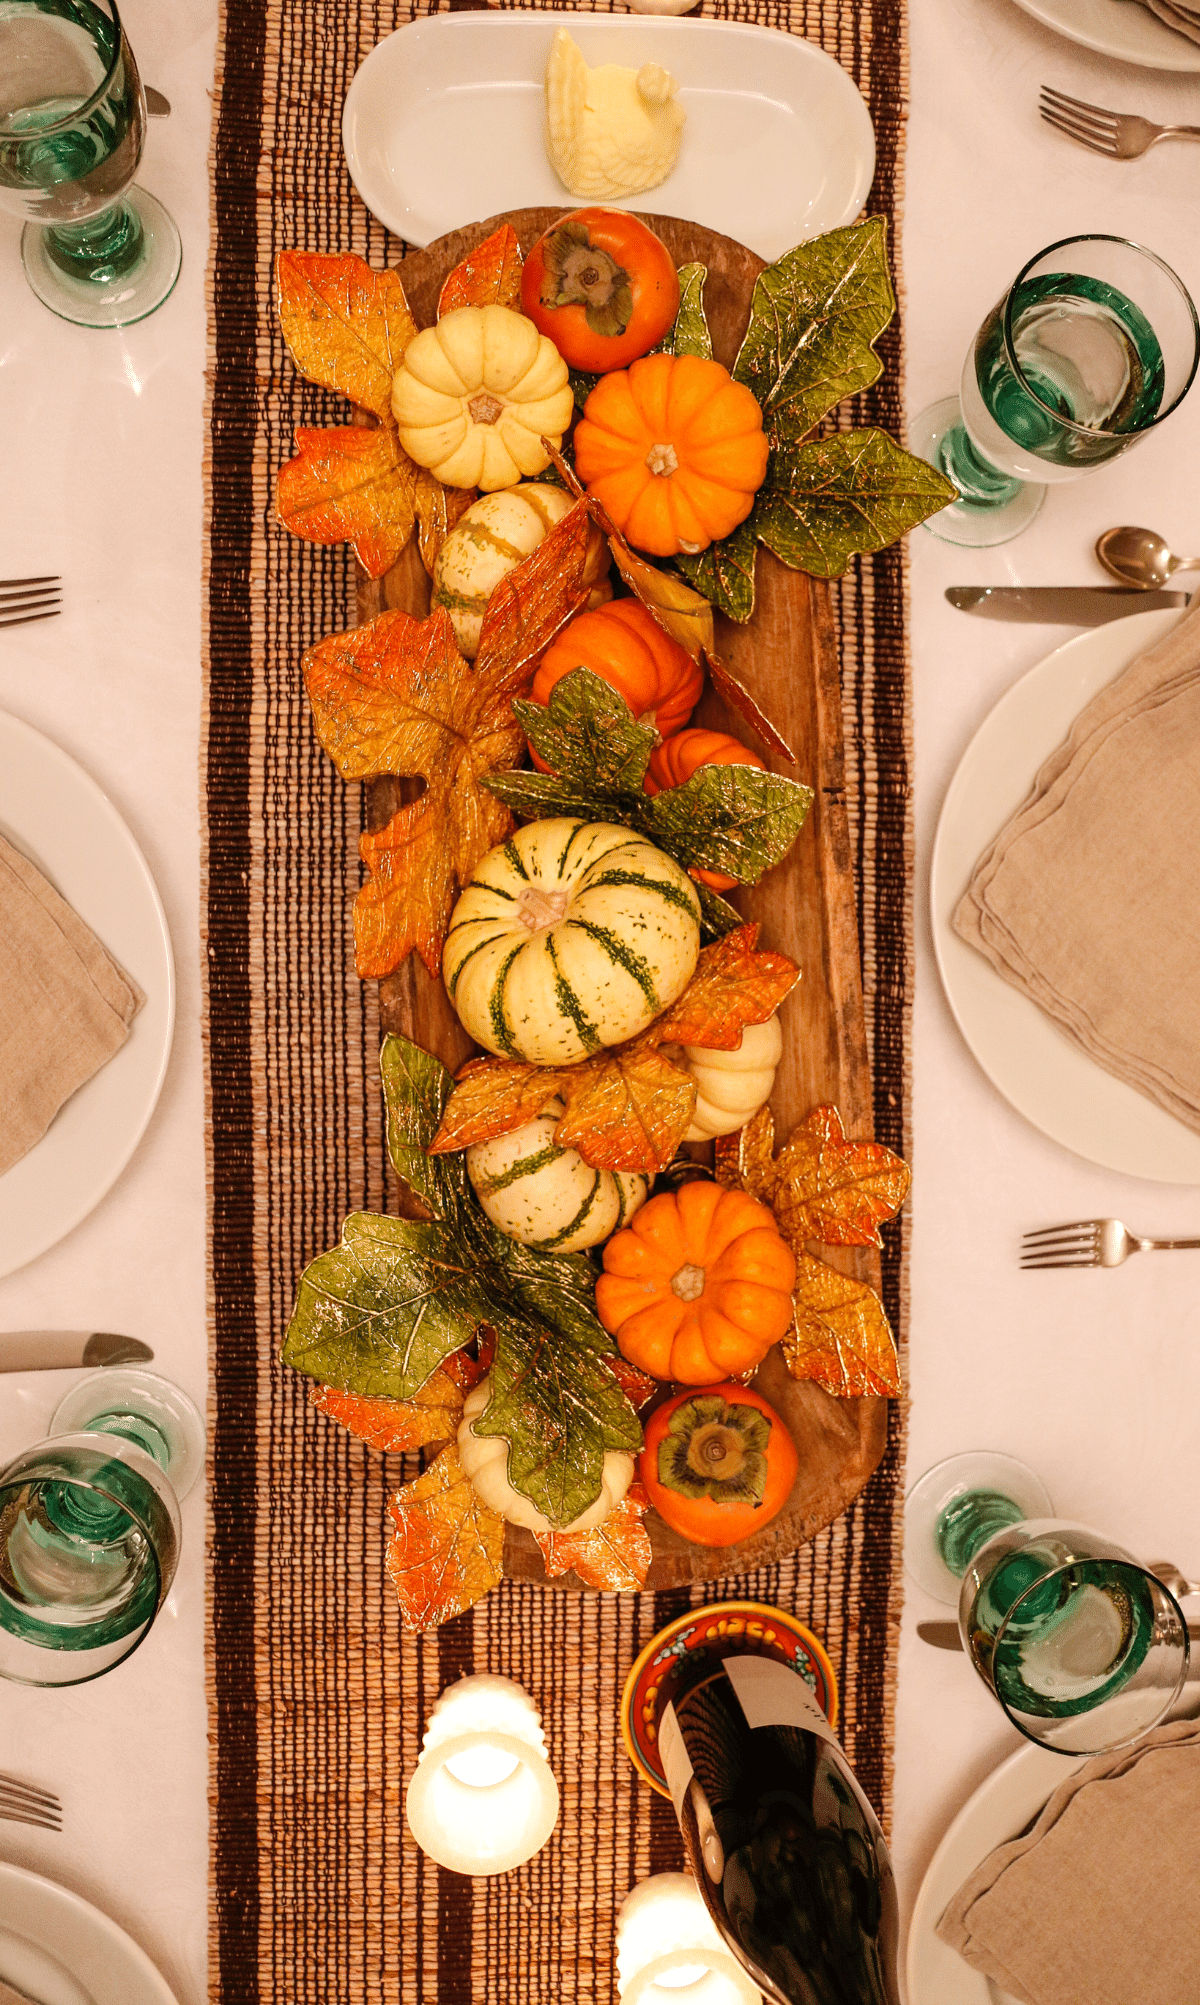 “Gobble, Gobble!”: This Year’s Thanksgiving Runner for your Table. Dine in style!